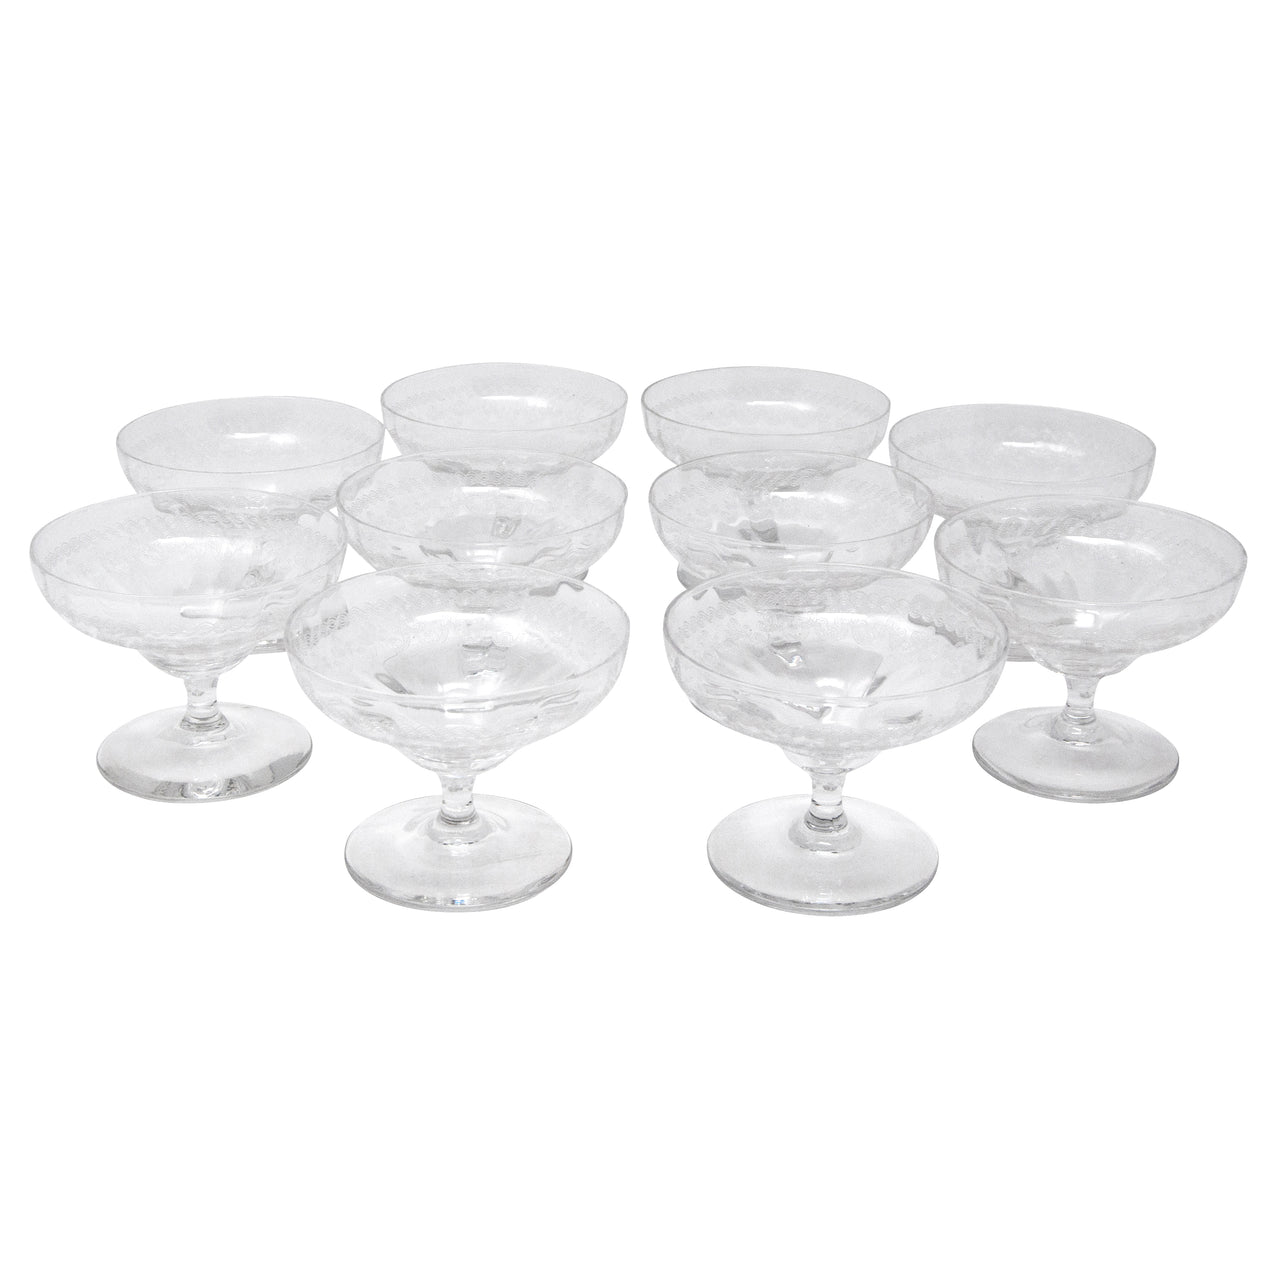 Vintage Clear Etched Paneled Coupe Glasses | The Hour Shop